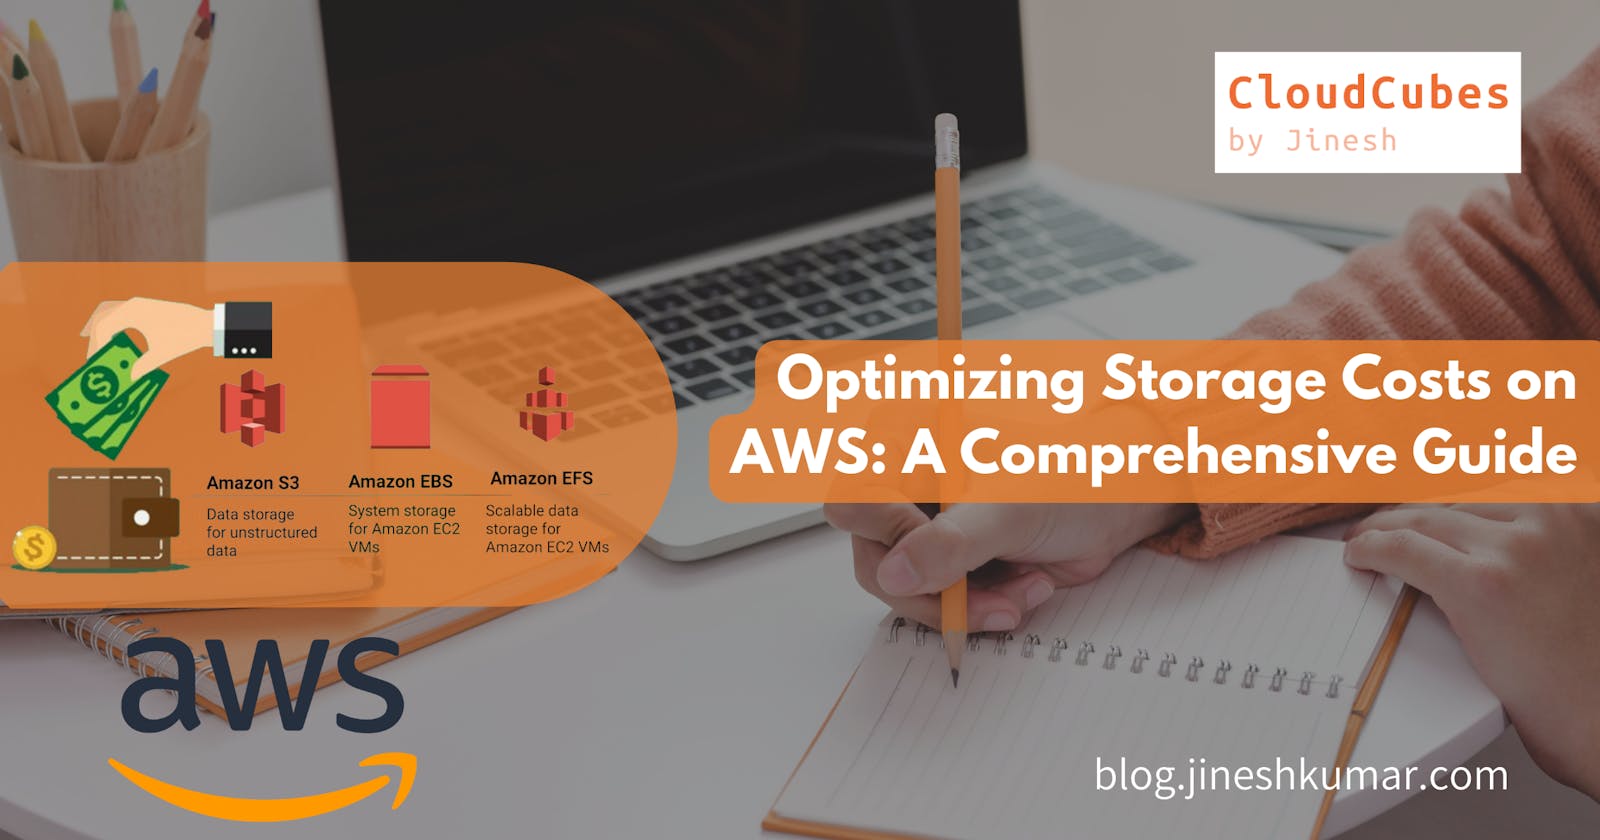 Optimizing Storage Costs on AWS: A Comprehensive Guide